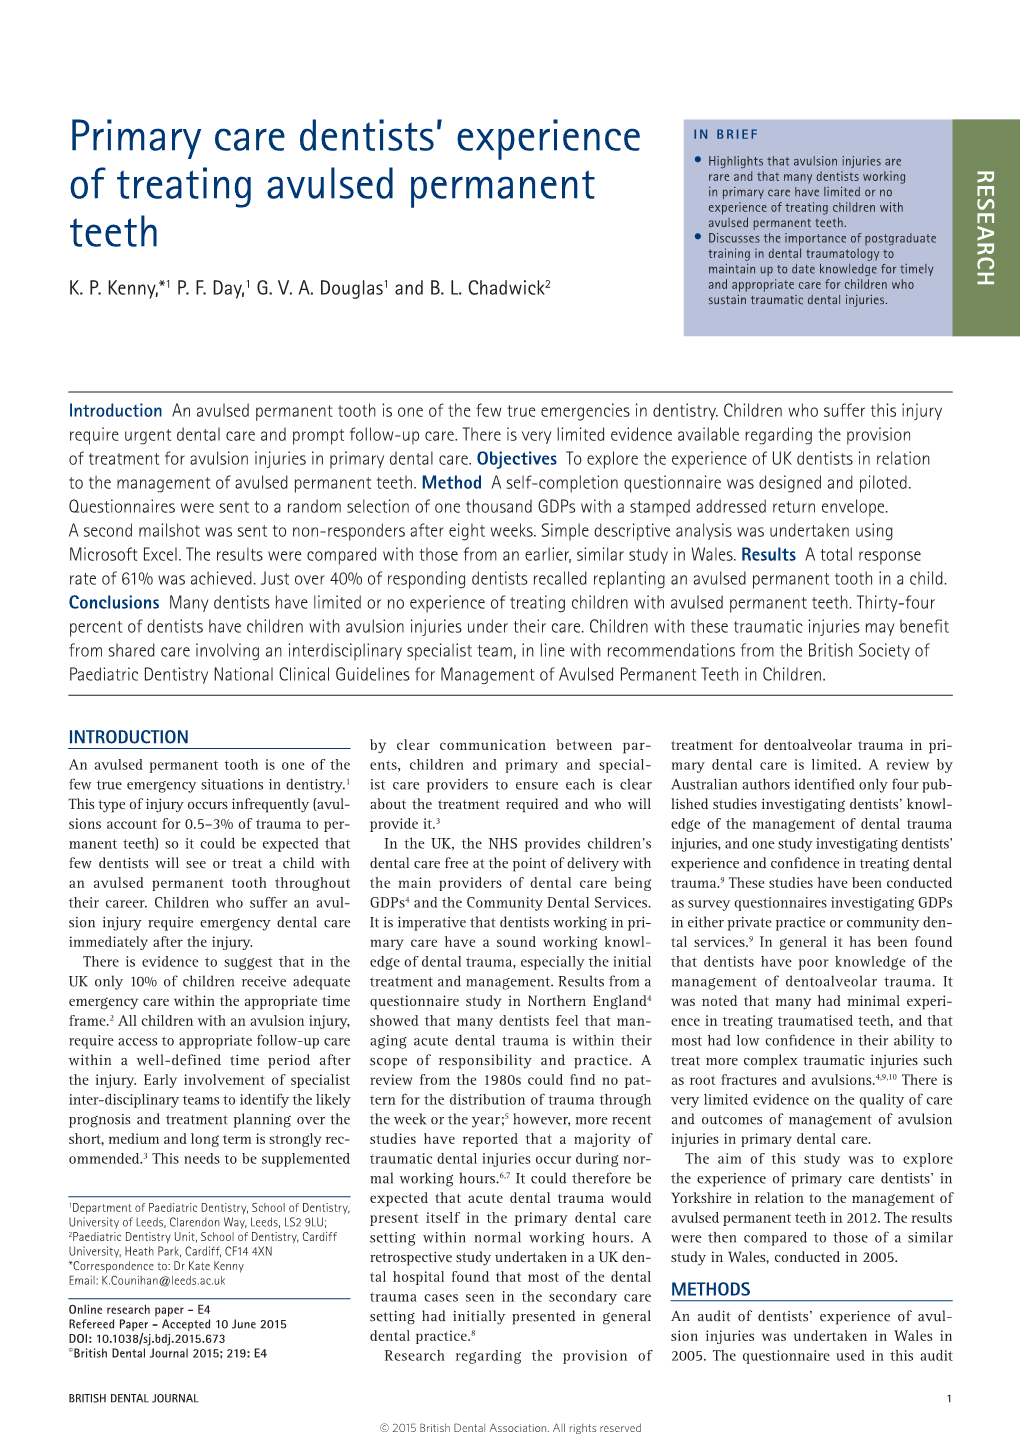 Primary Care Dentists' Experience of Treating Avulsed Permanent Teeth